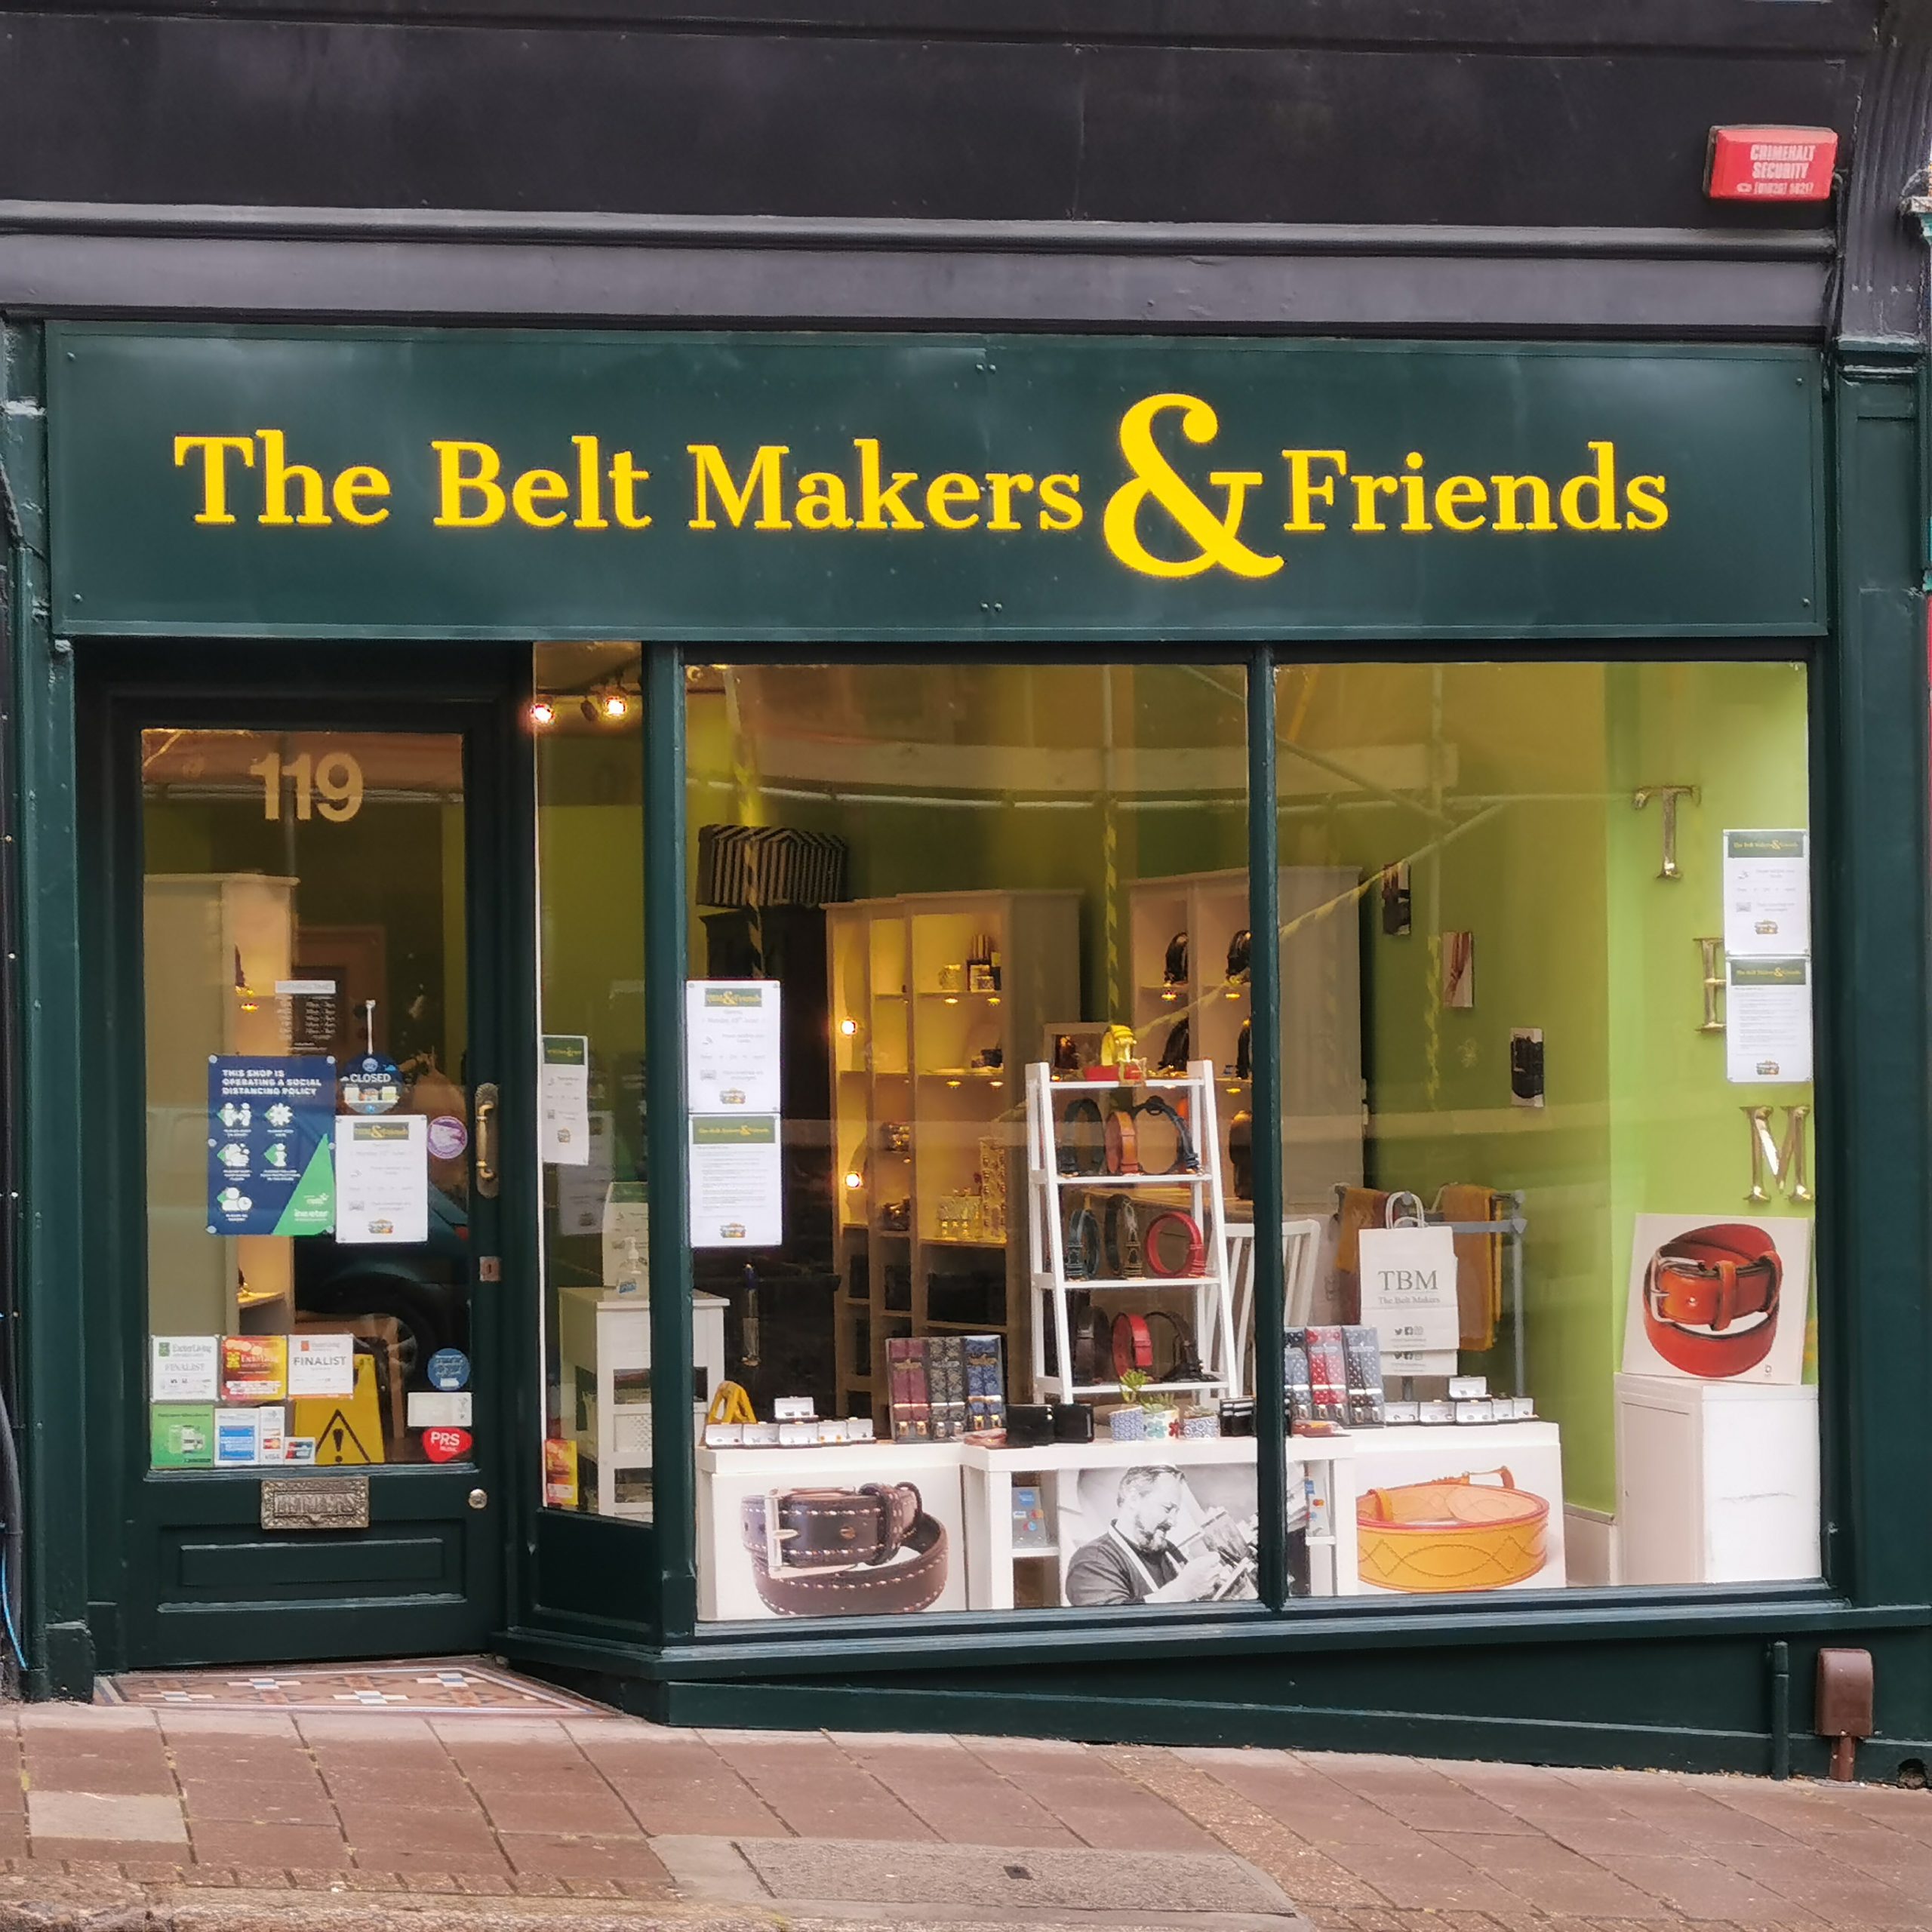 TBM and Friends shop front